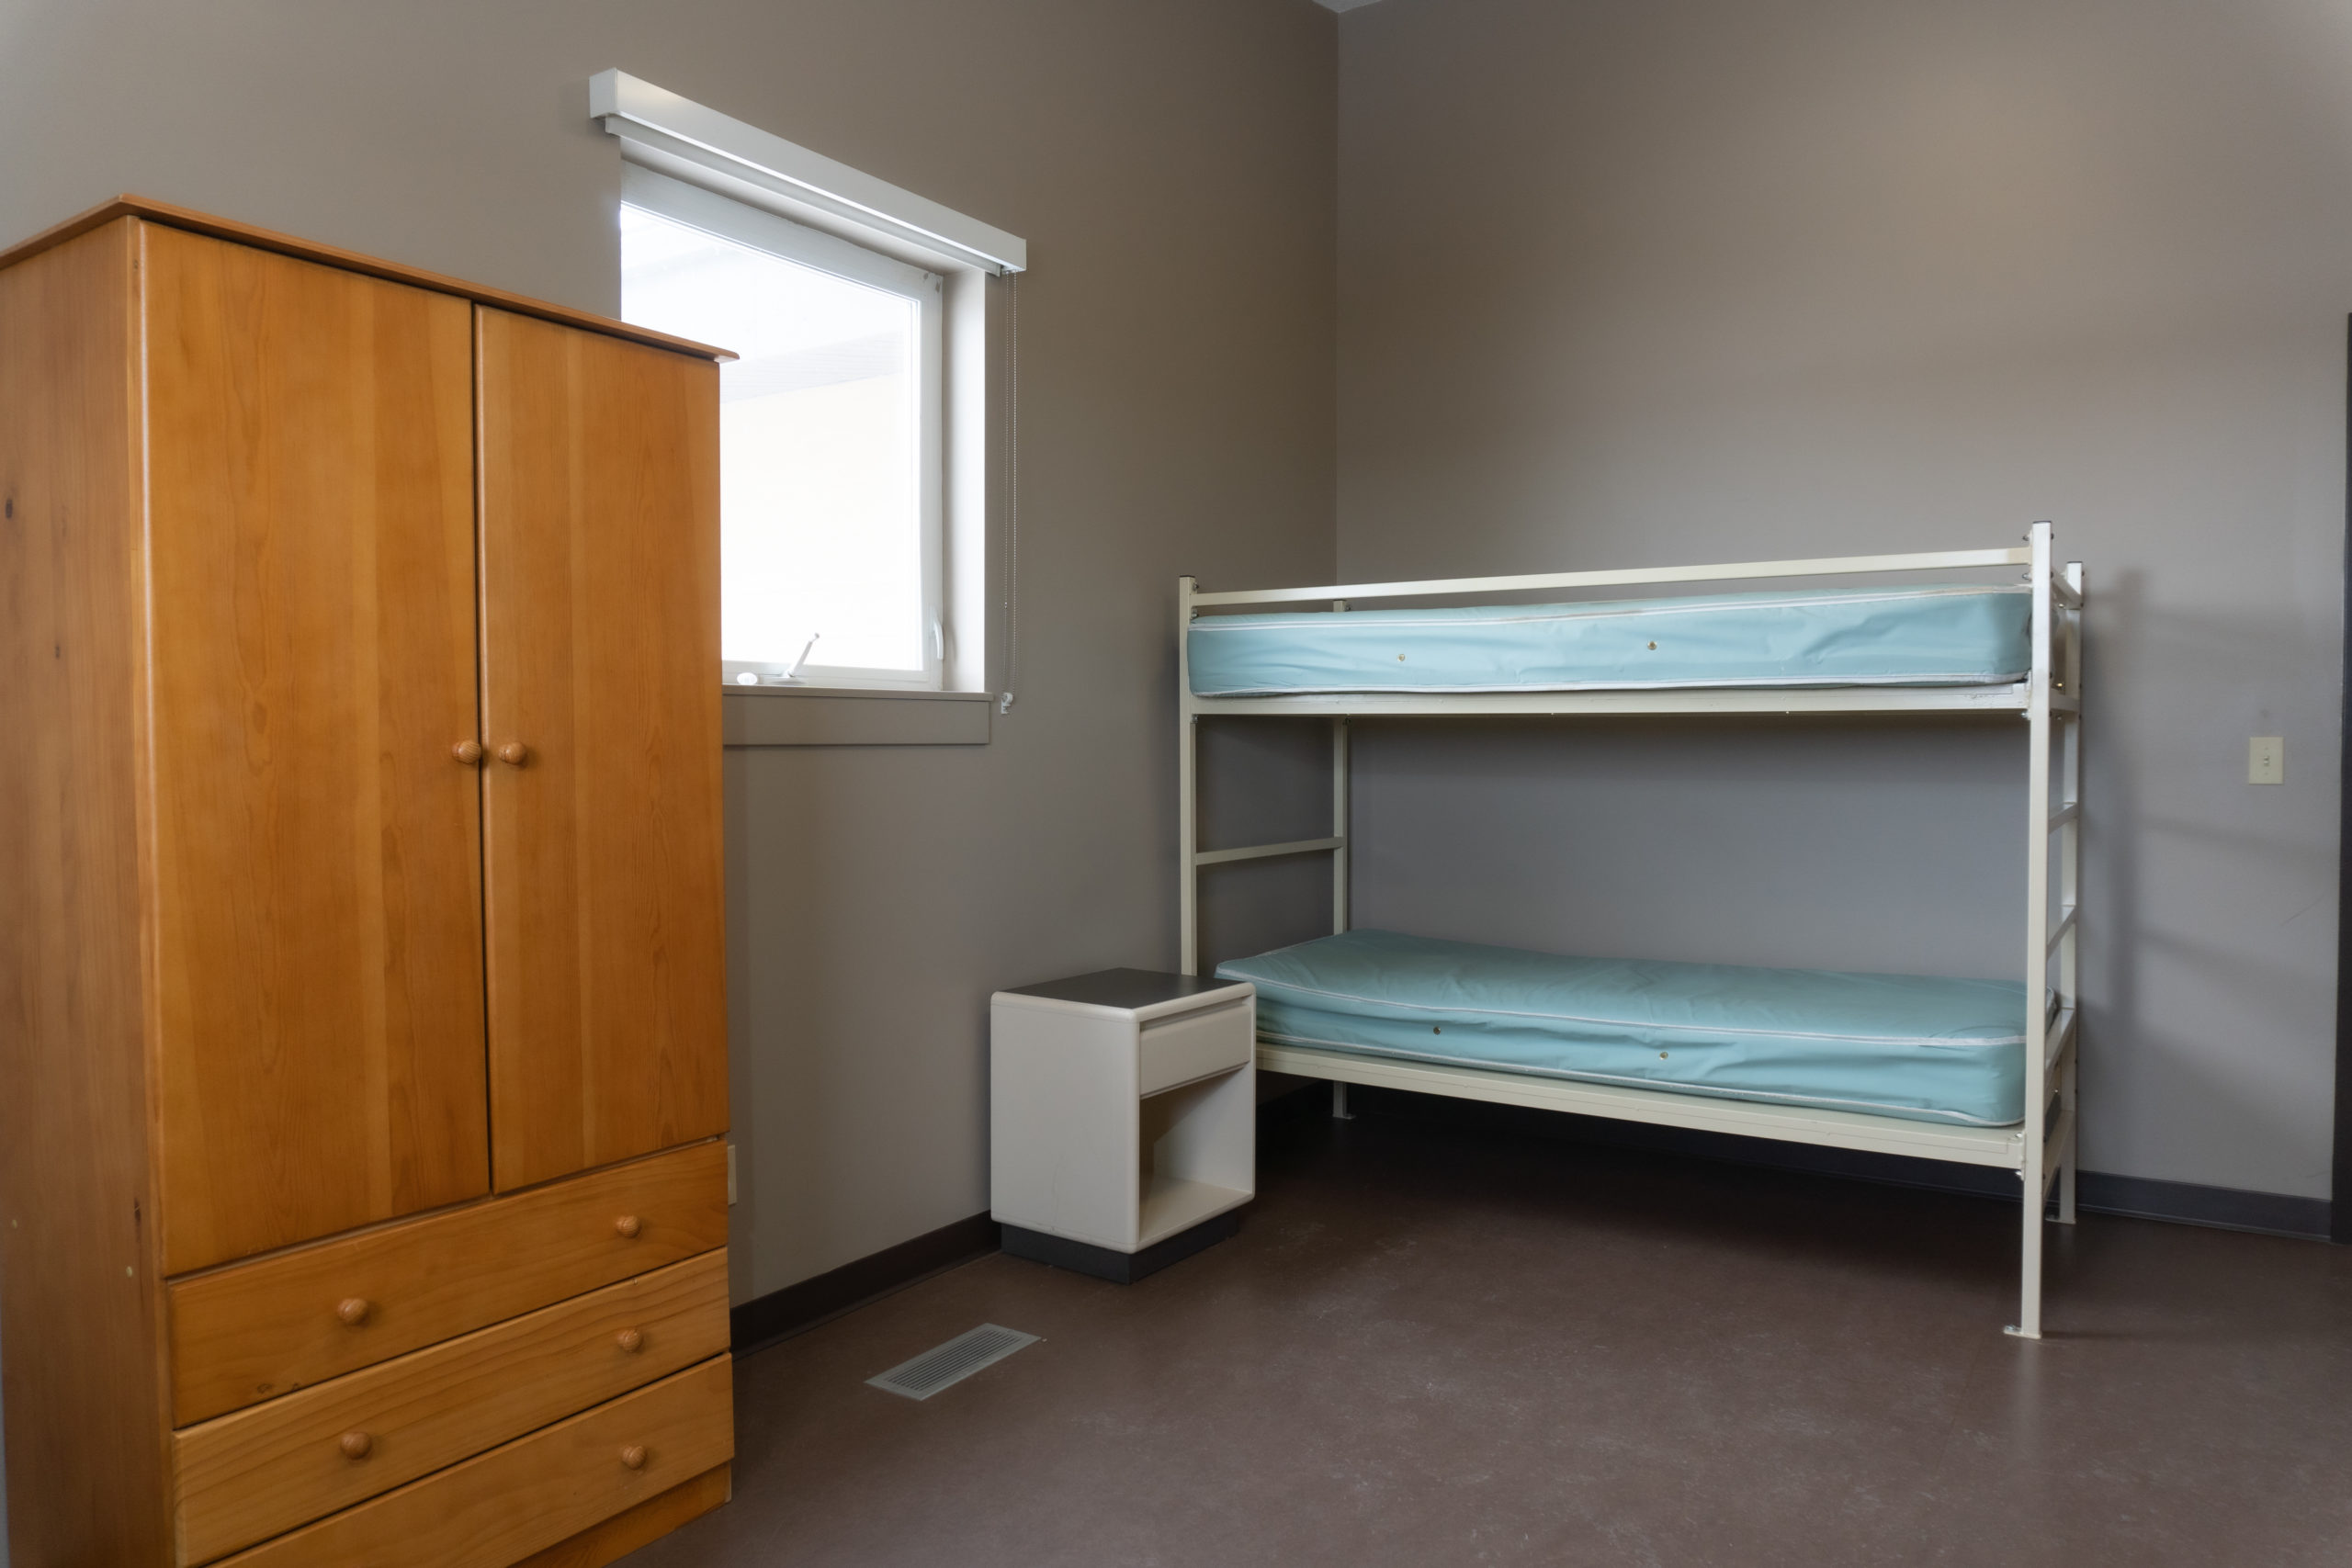 L Counsellor Room 2 - The Salvation Army's Pine Lake Camp